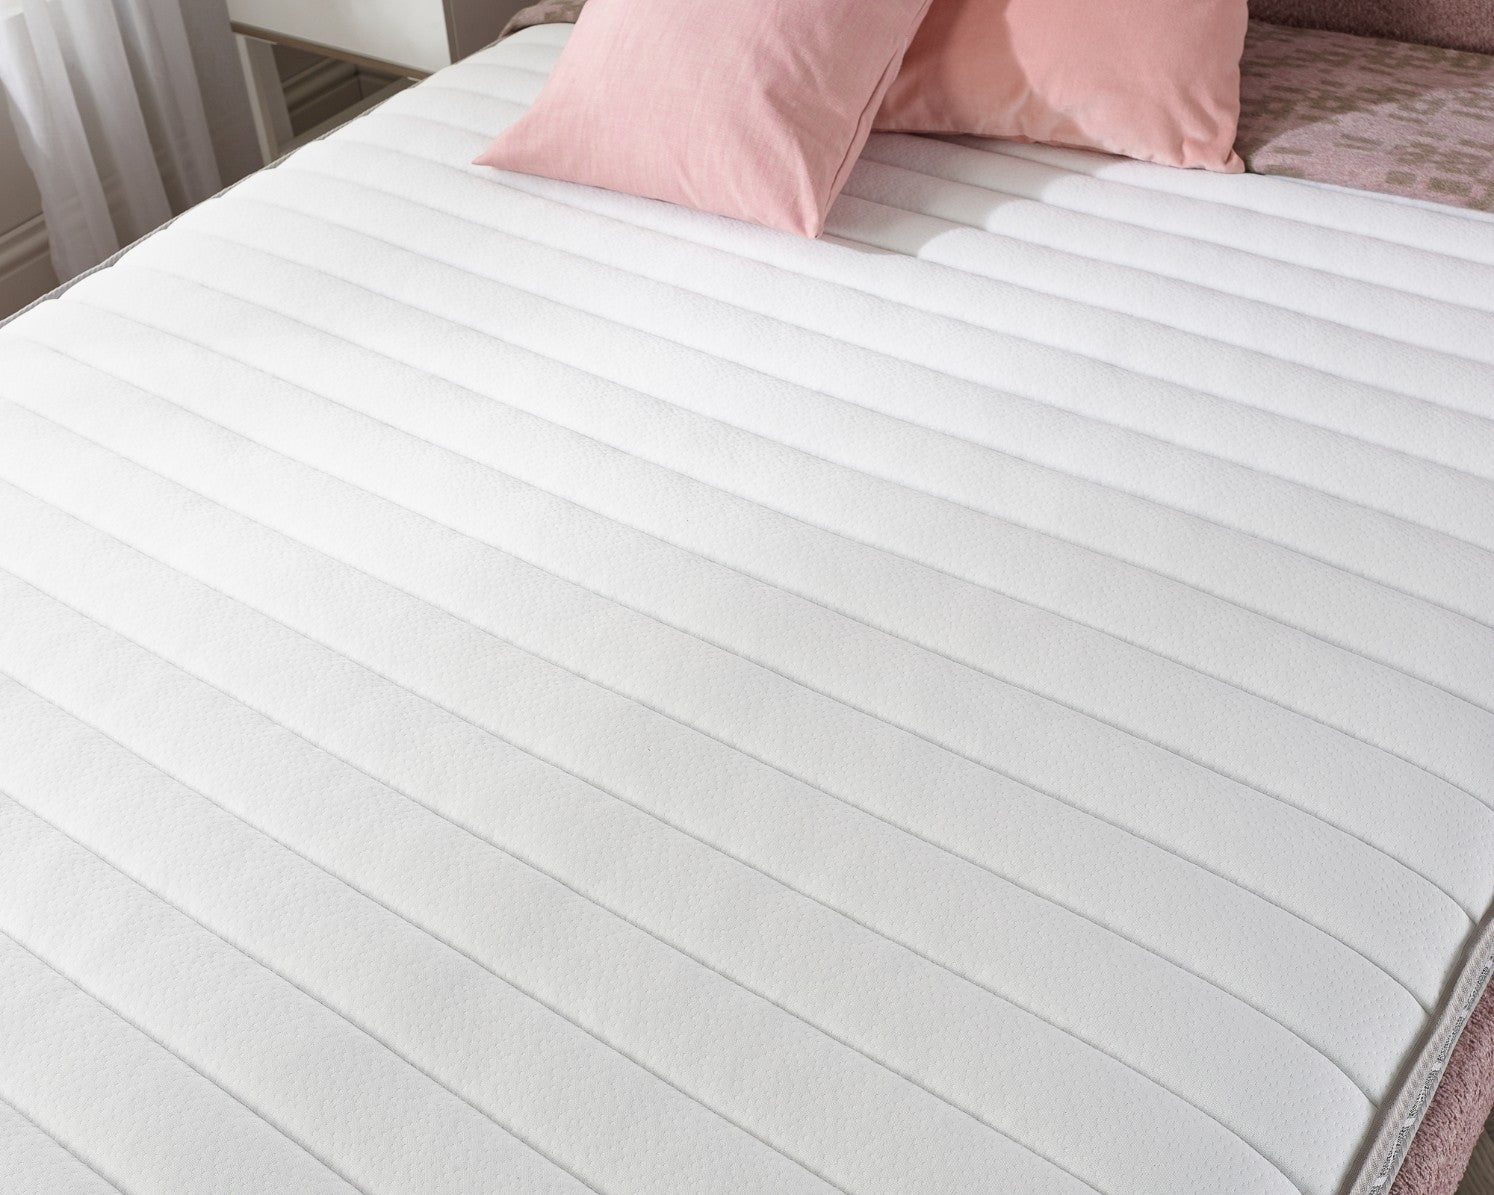 Aspire Dual Layer Pro Hybrid Rolled Mattress Top-Better Bed Company